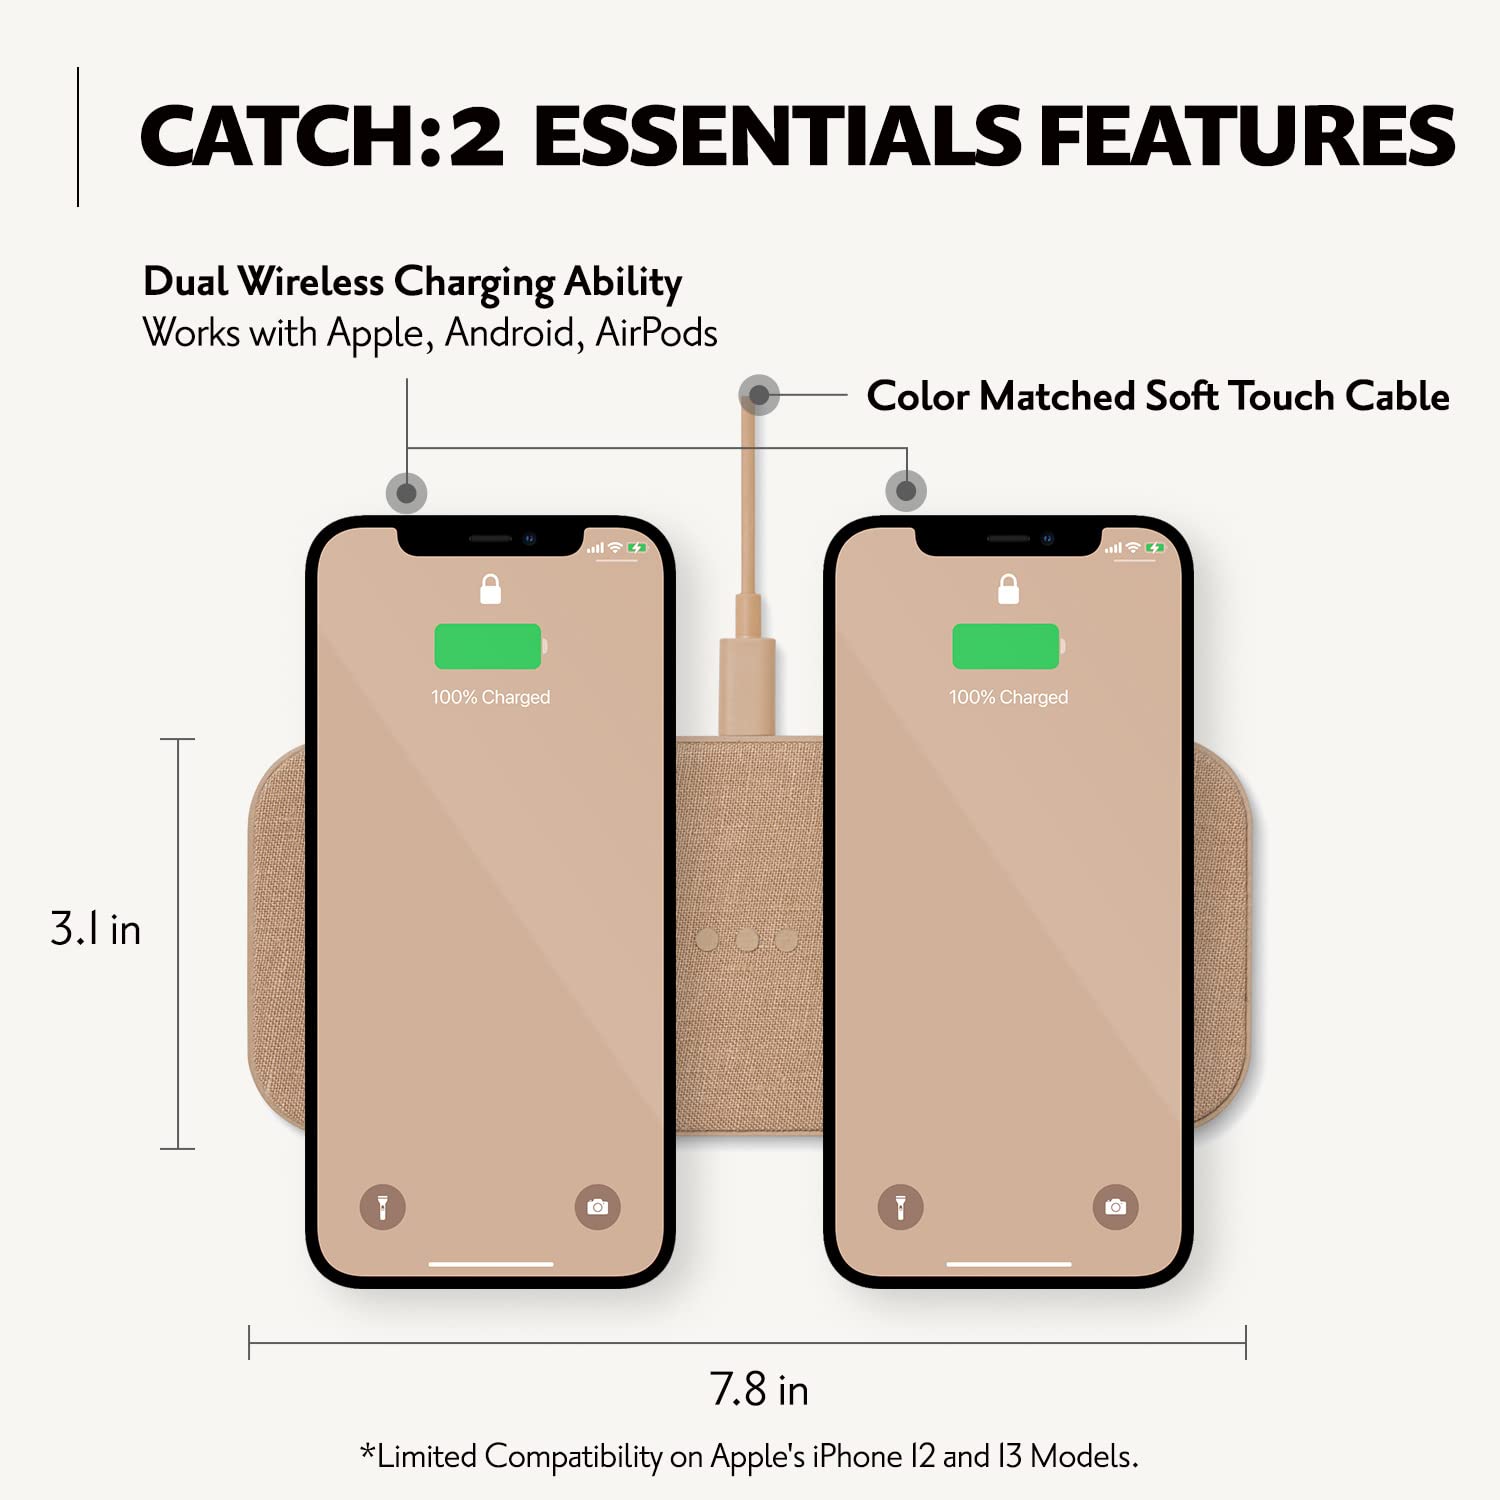 Mua Courant Catch:2 Essentials - Belgian Linen Dual Wireless Charging Pad -  Qi-Certified - Compatible with iPhone 11, X, SE, Galaxy S23, S22, S21, S20,  Note, AirPods/Pro (Camel) trên Amazon Mỹ chính